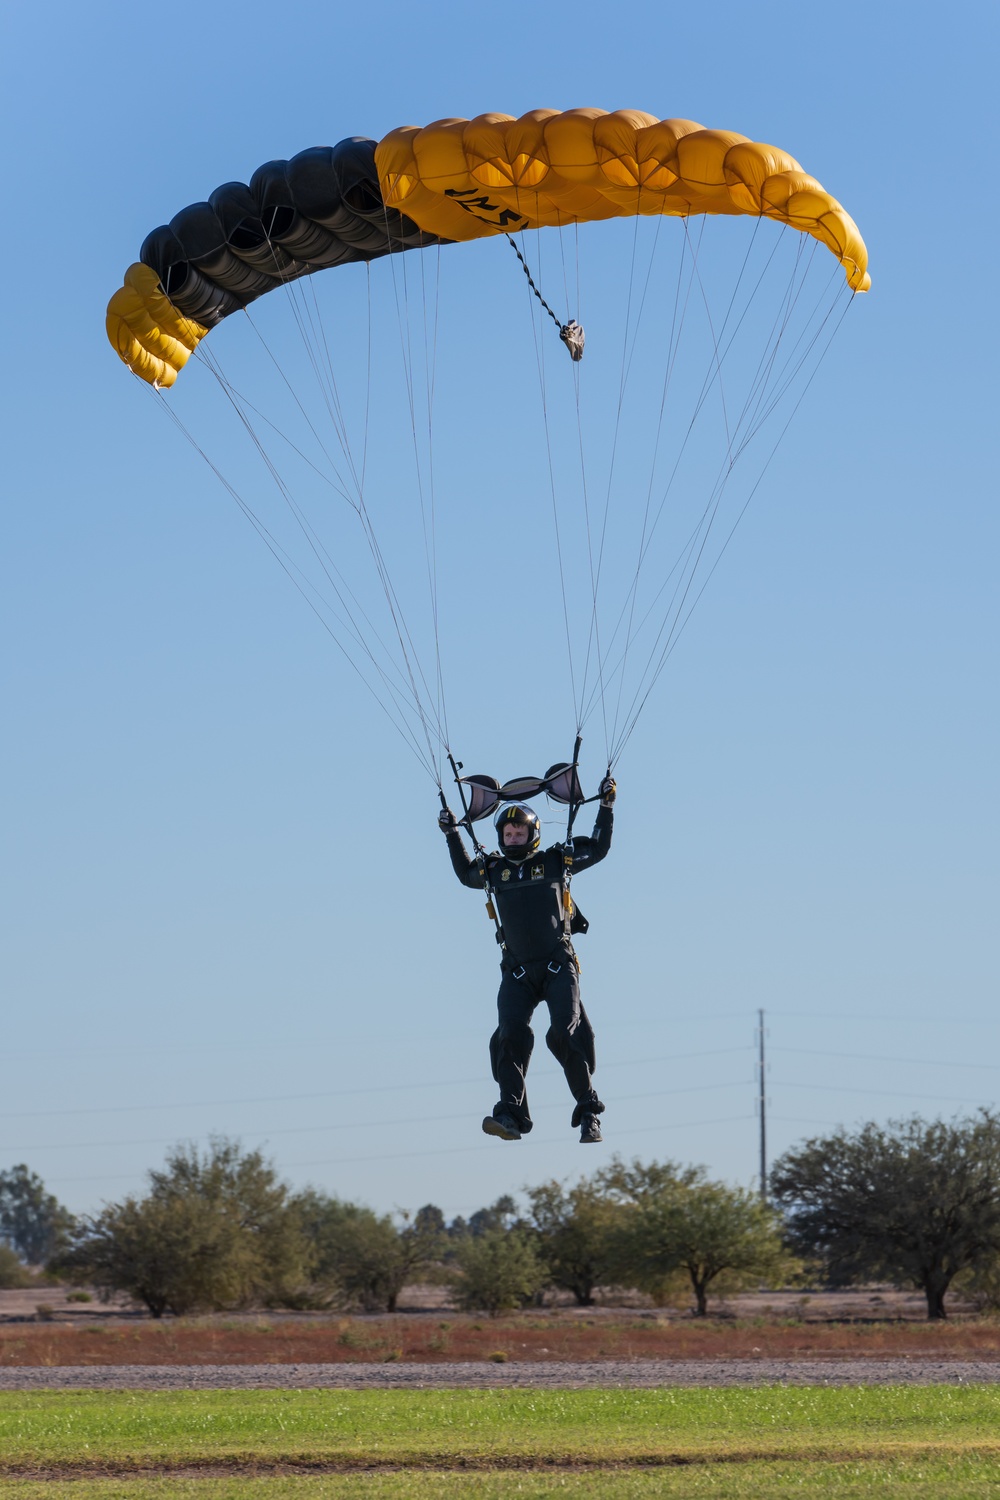 DVIDS Images U.S. Army Parachute Team competes in National